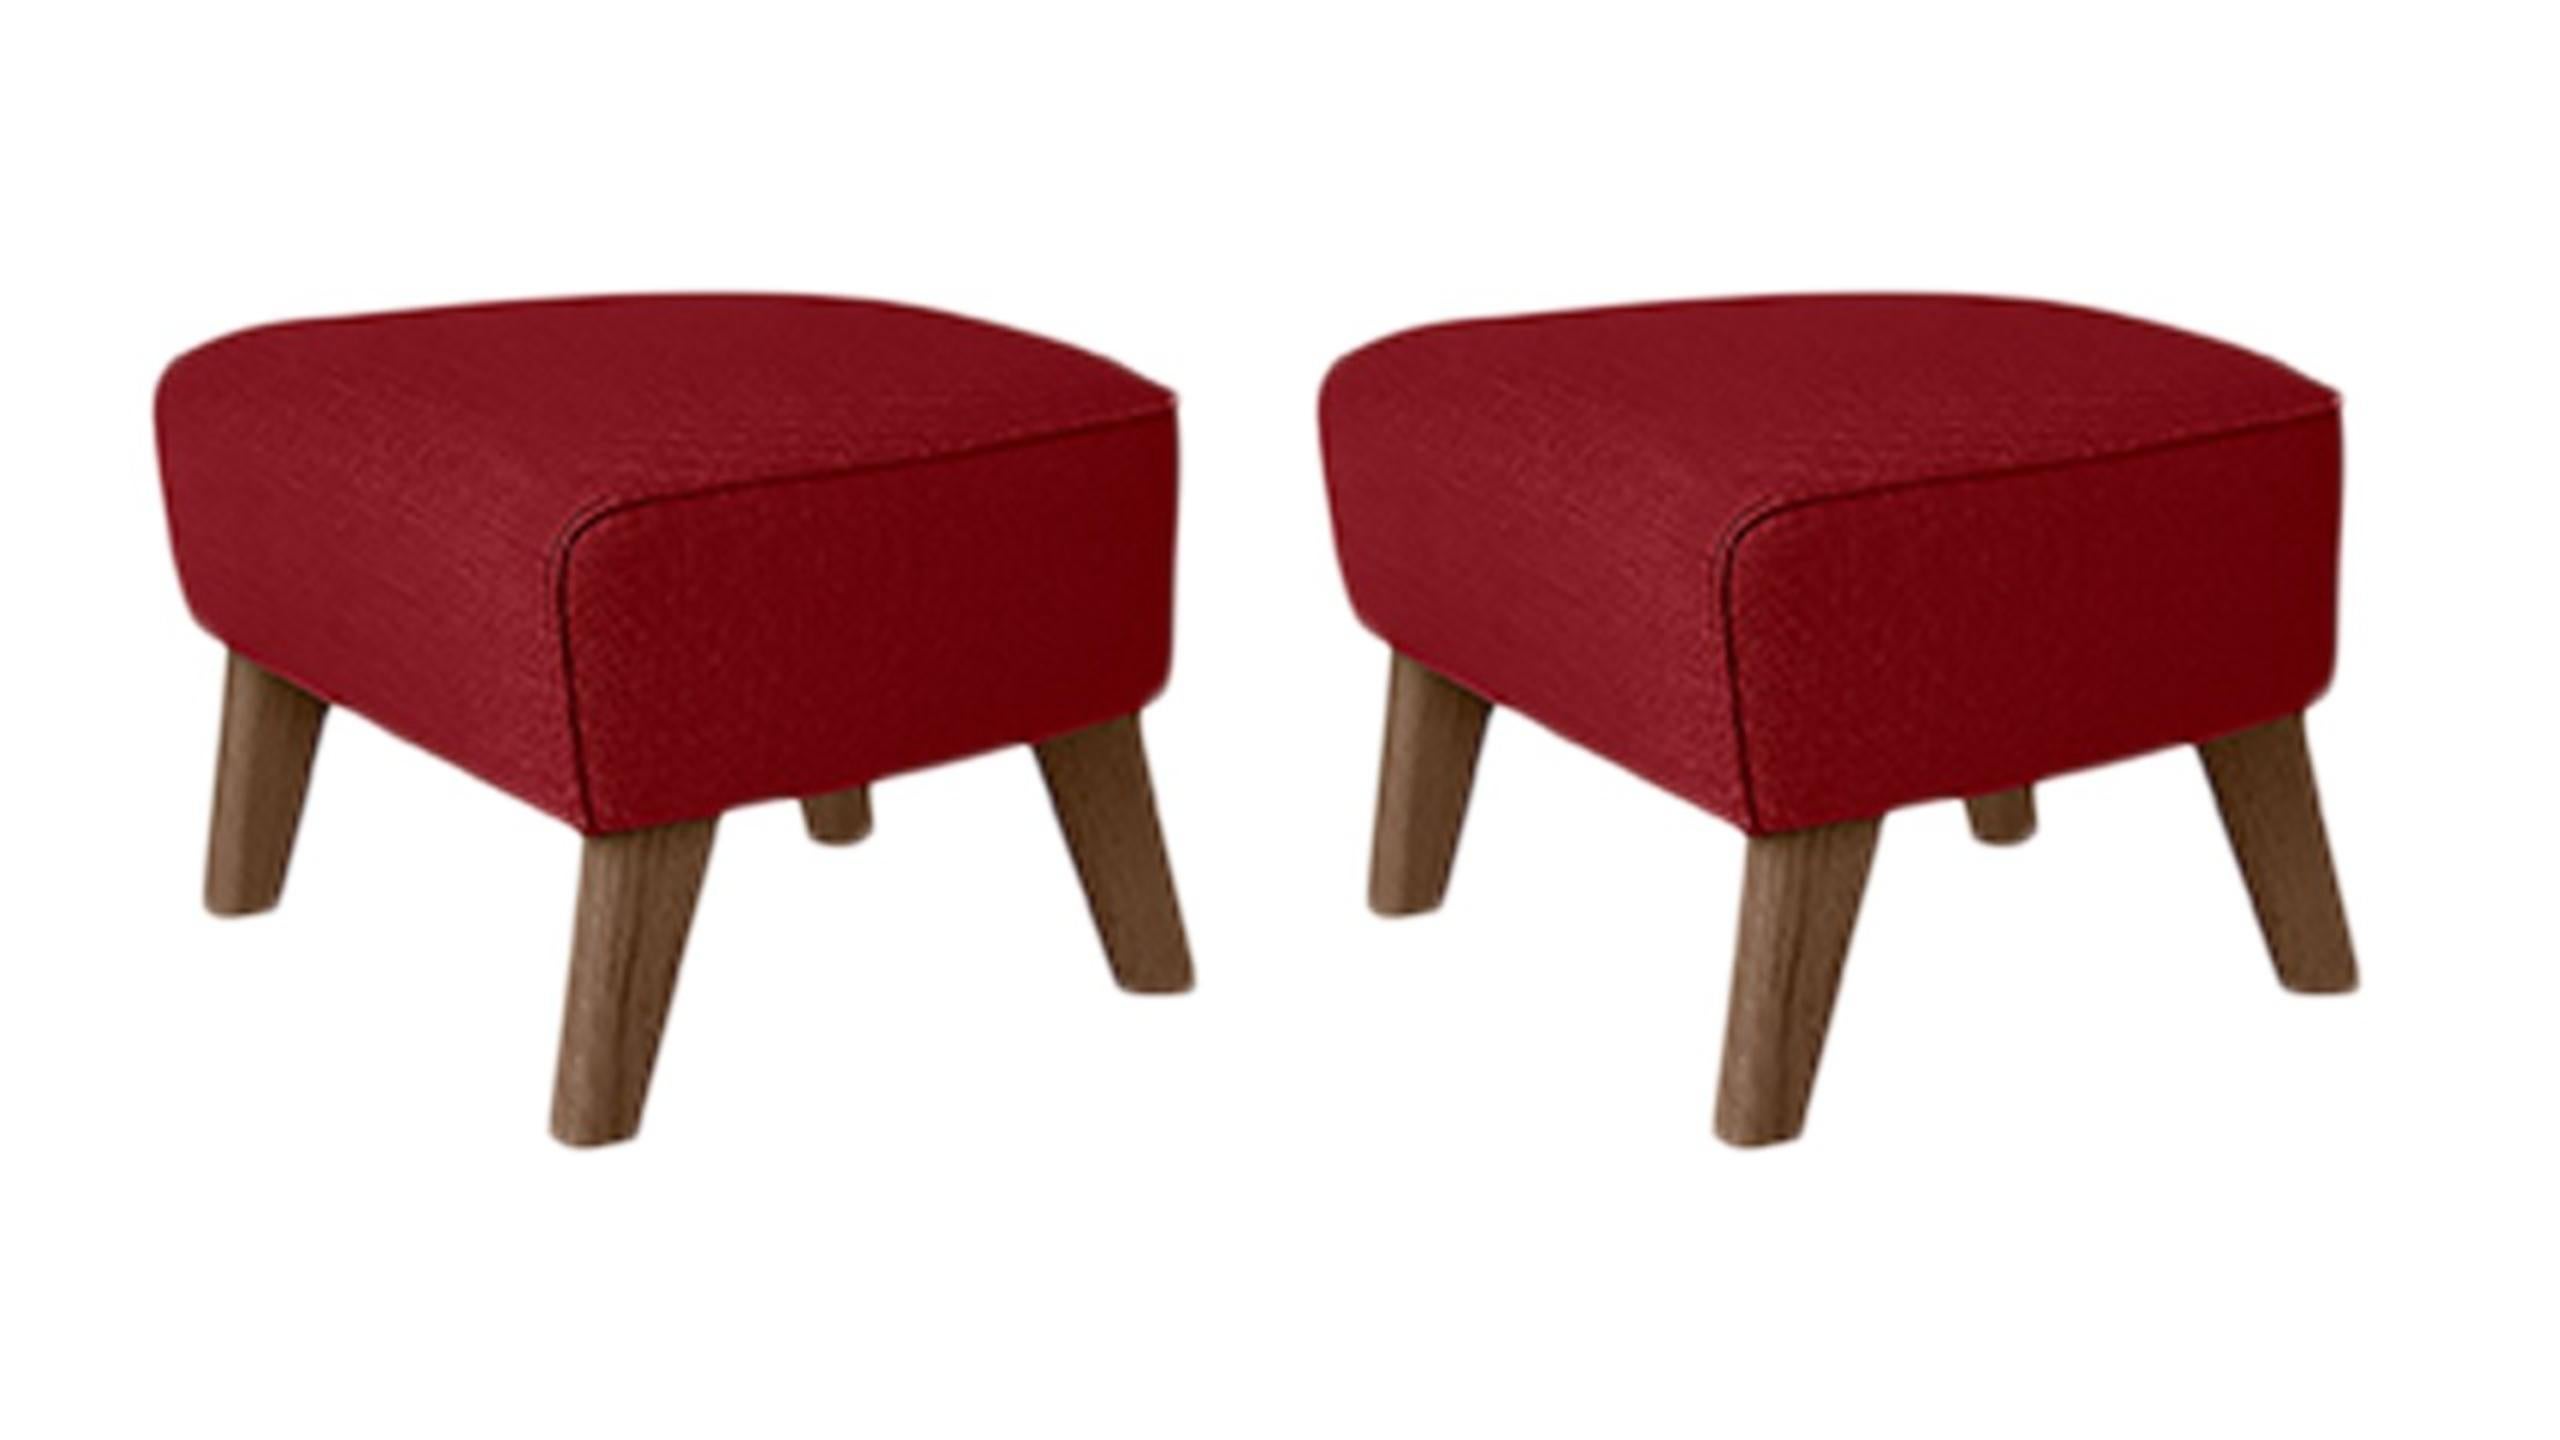 Set of 2 red, smoked Oak Raf Simons Vidar 3 My Own Chair footstool by Lassen
Dimensions: W 56 x D 58 x H 40 cm 
Materials: Textile
Also Available: Other colors available.

The My Own Chair footstool has been designed in the same spirit as